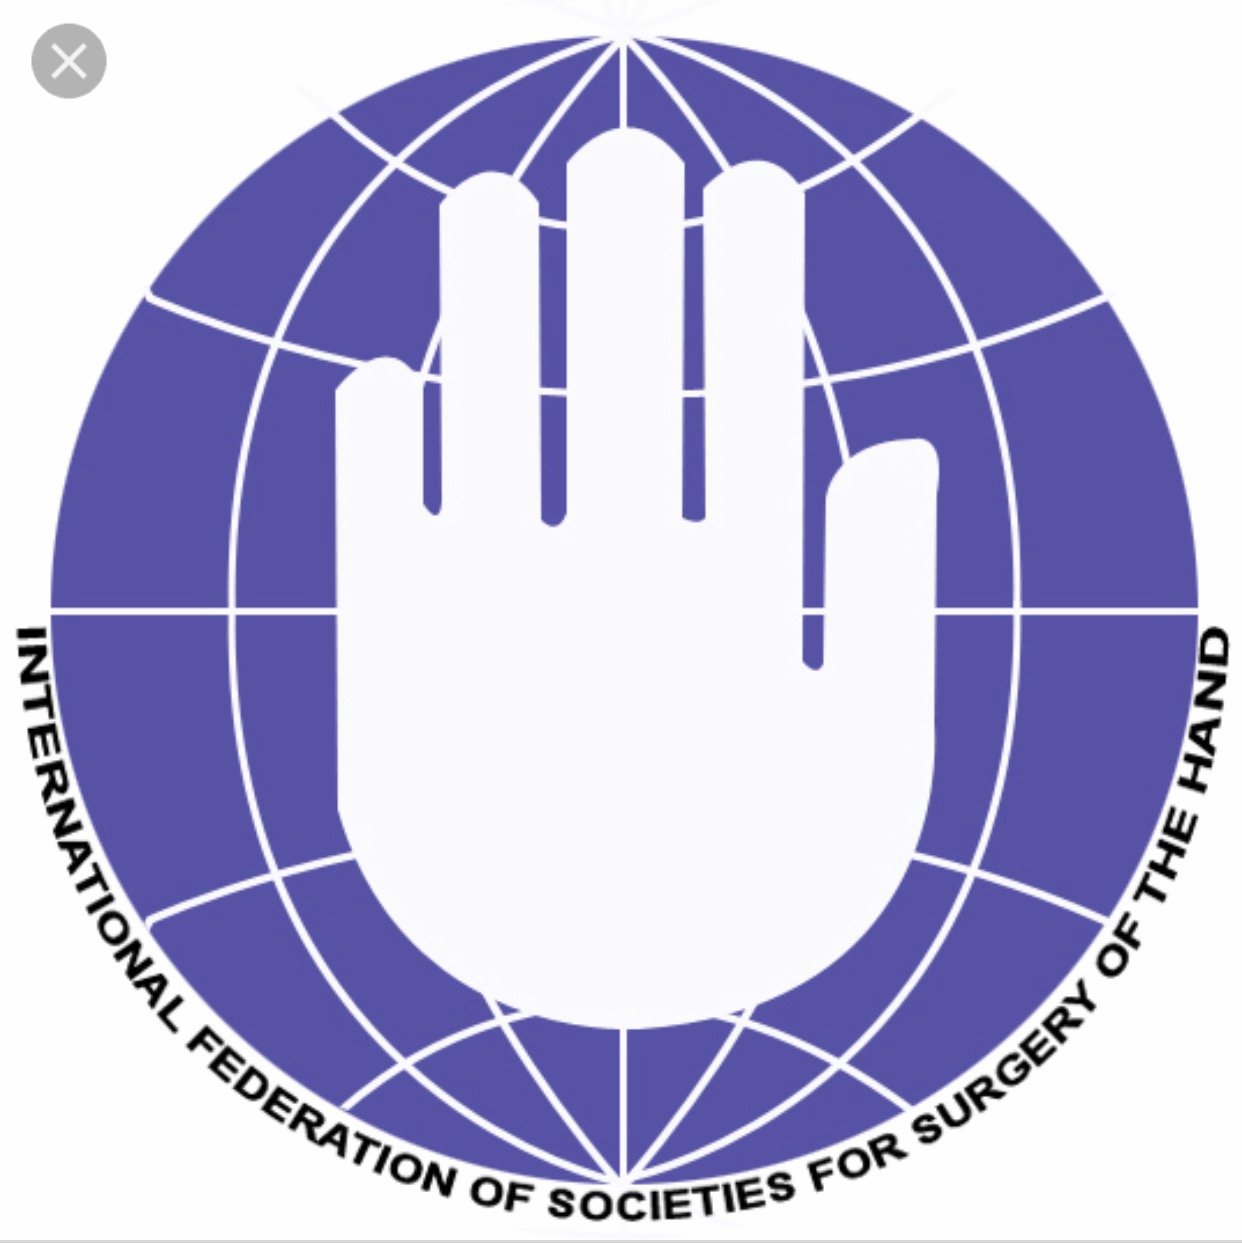 The International Federation of Societies for Surgery of the Hand